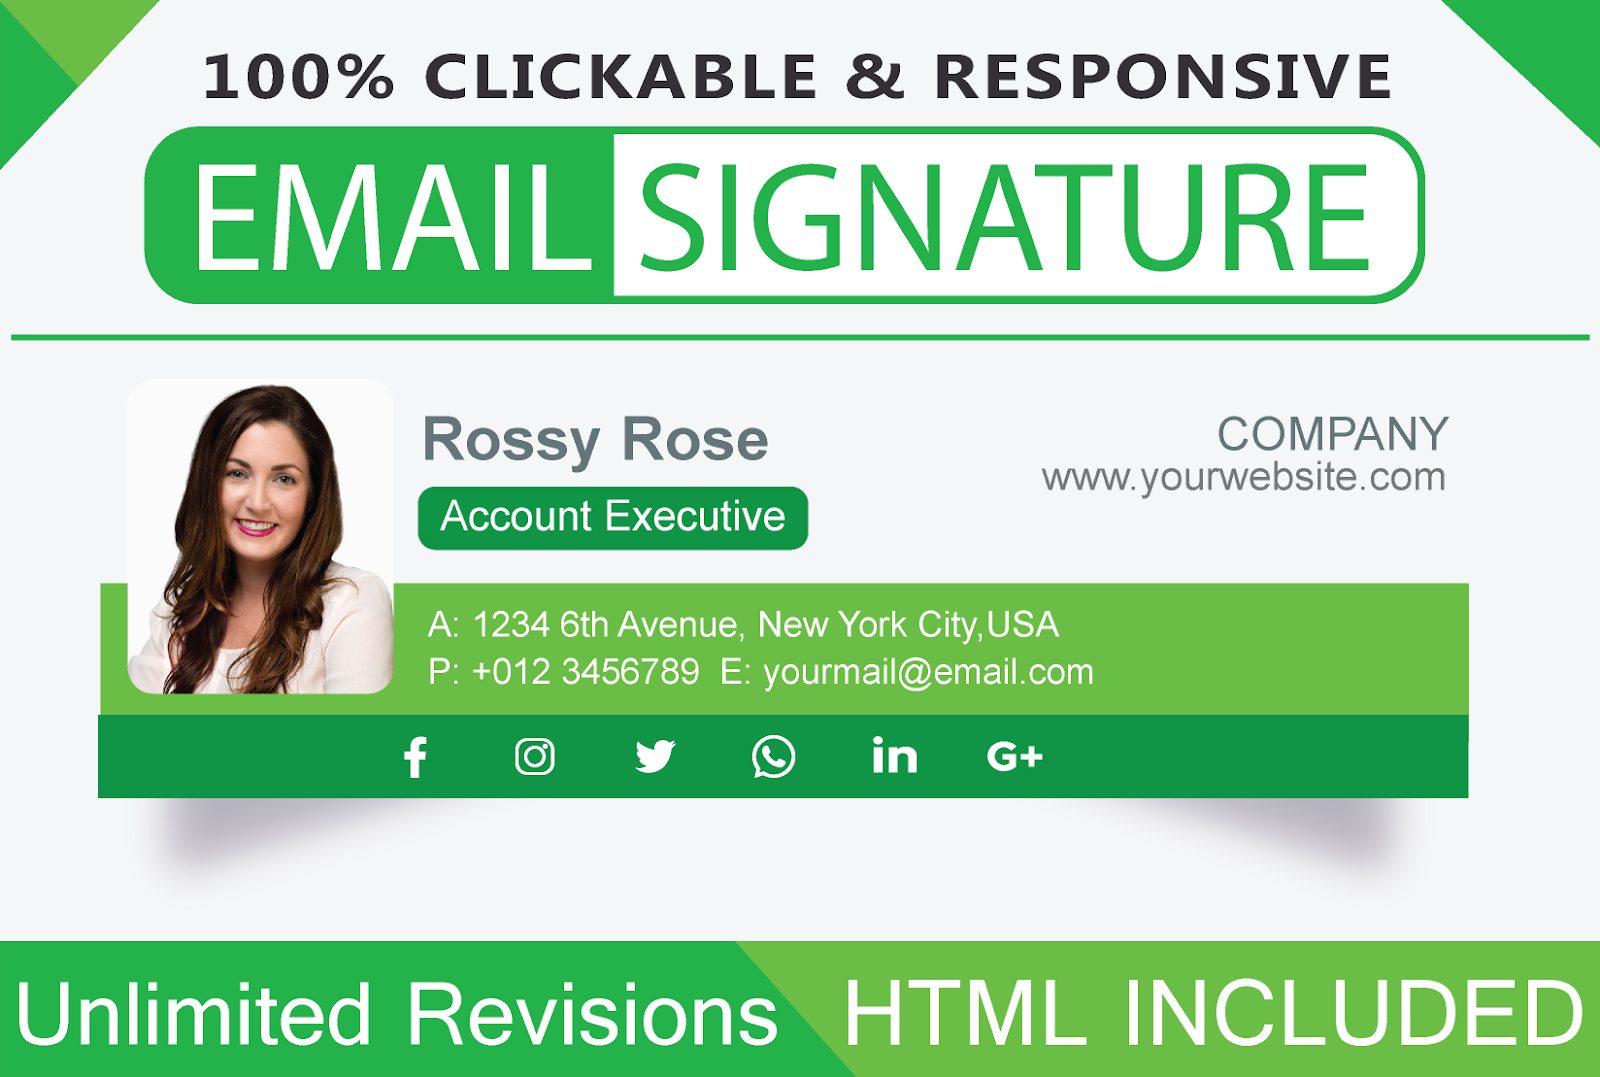 I will create an HTML email signature or clickable email signature